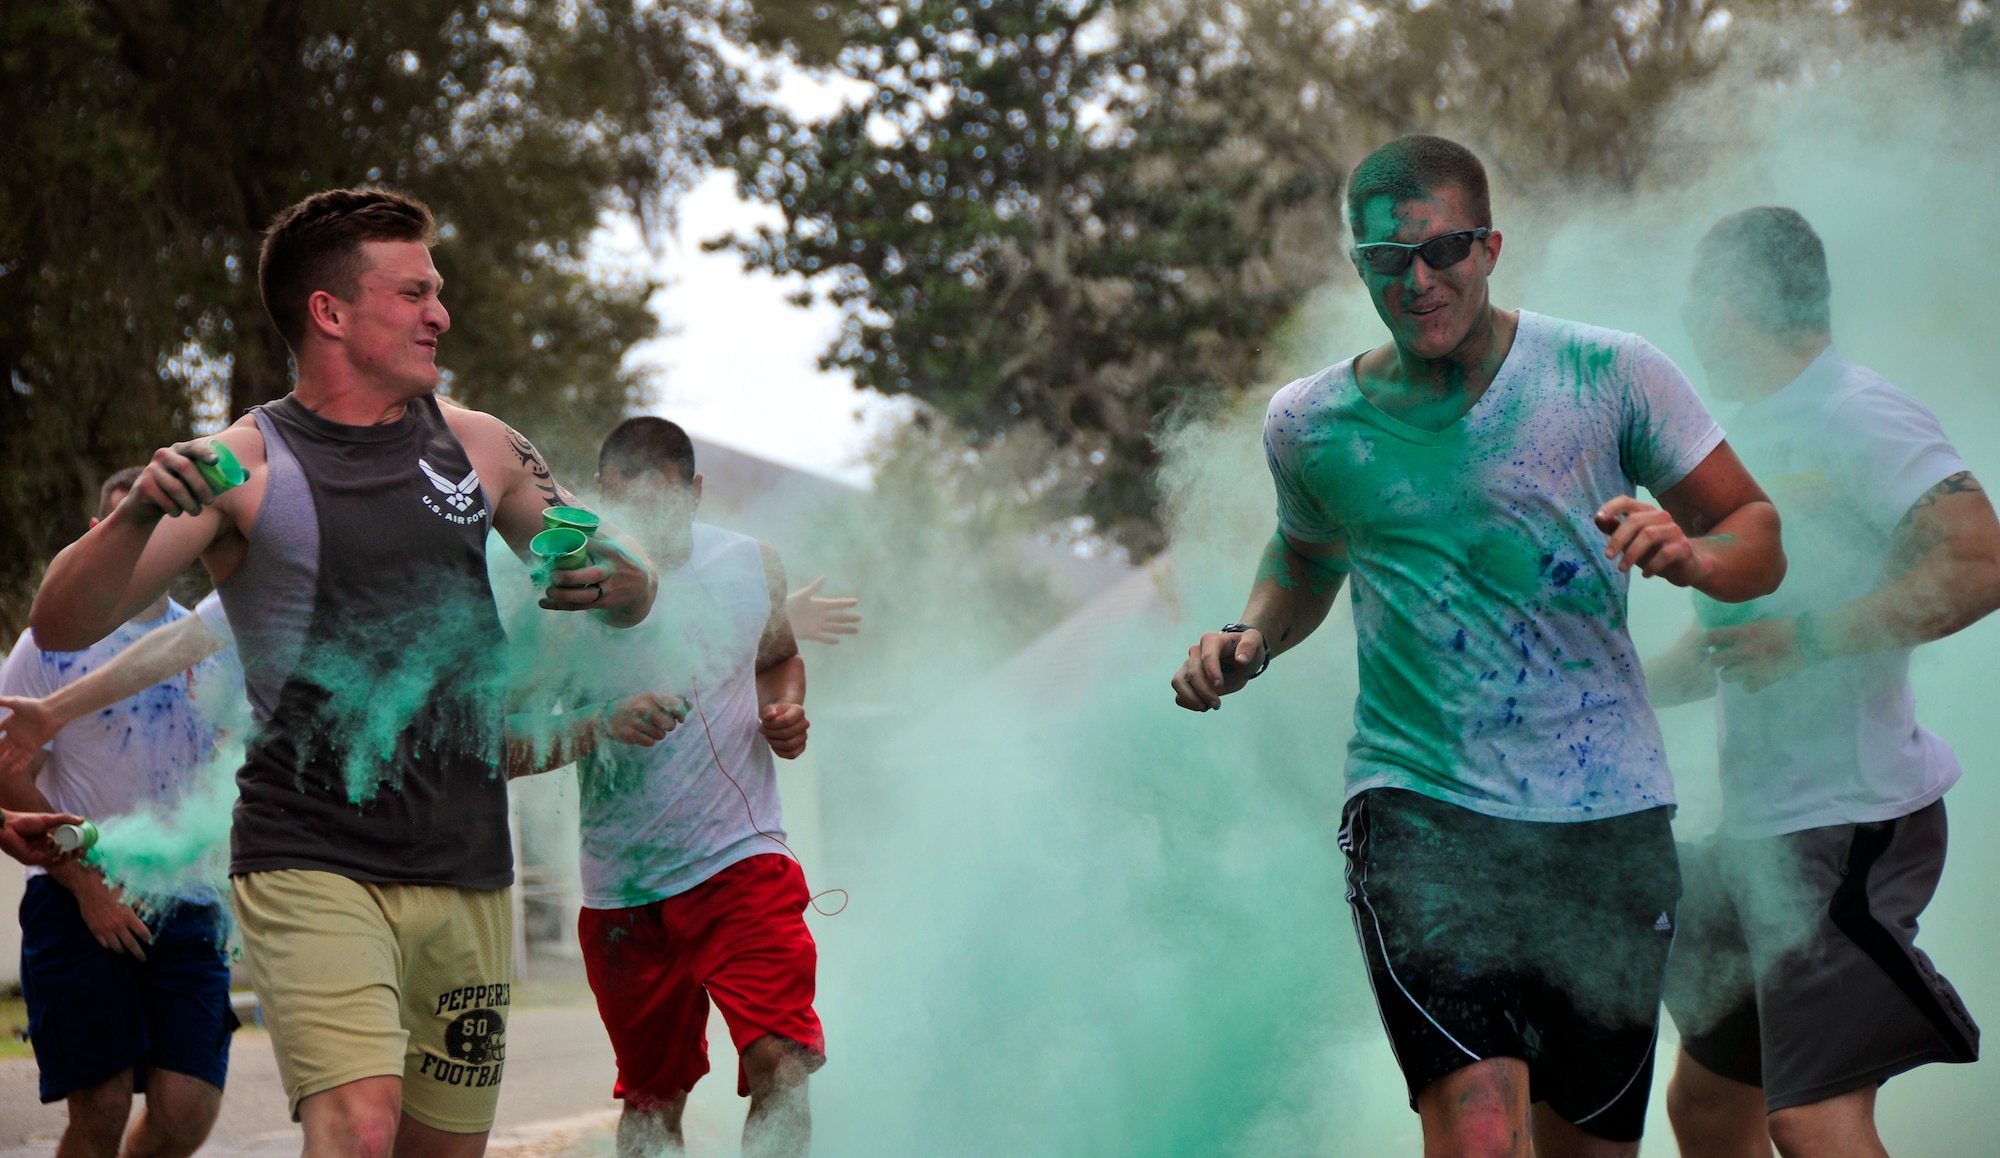 A volunteer gets ready to throw more green dust as runners pass through a color haze at the Color Me Aware fun run, April 4, at Eglin Air Force Base, Fla.  Approximately 30 volunteers helped more than 450 participants get colorful during three color zones of the three-mile run.  The event highlighted the start of Sexual Assault Awareness Month. (U.S. Air Force photo/Tech. Sgt. Cheryl Foster)